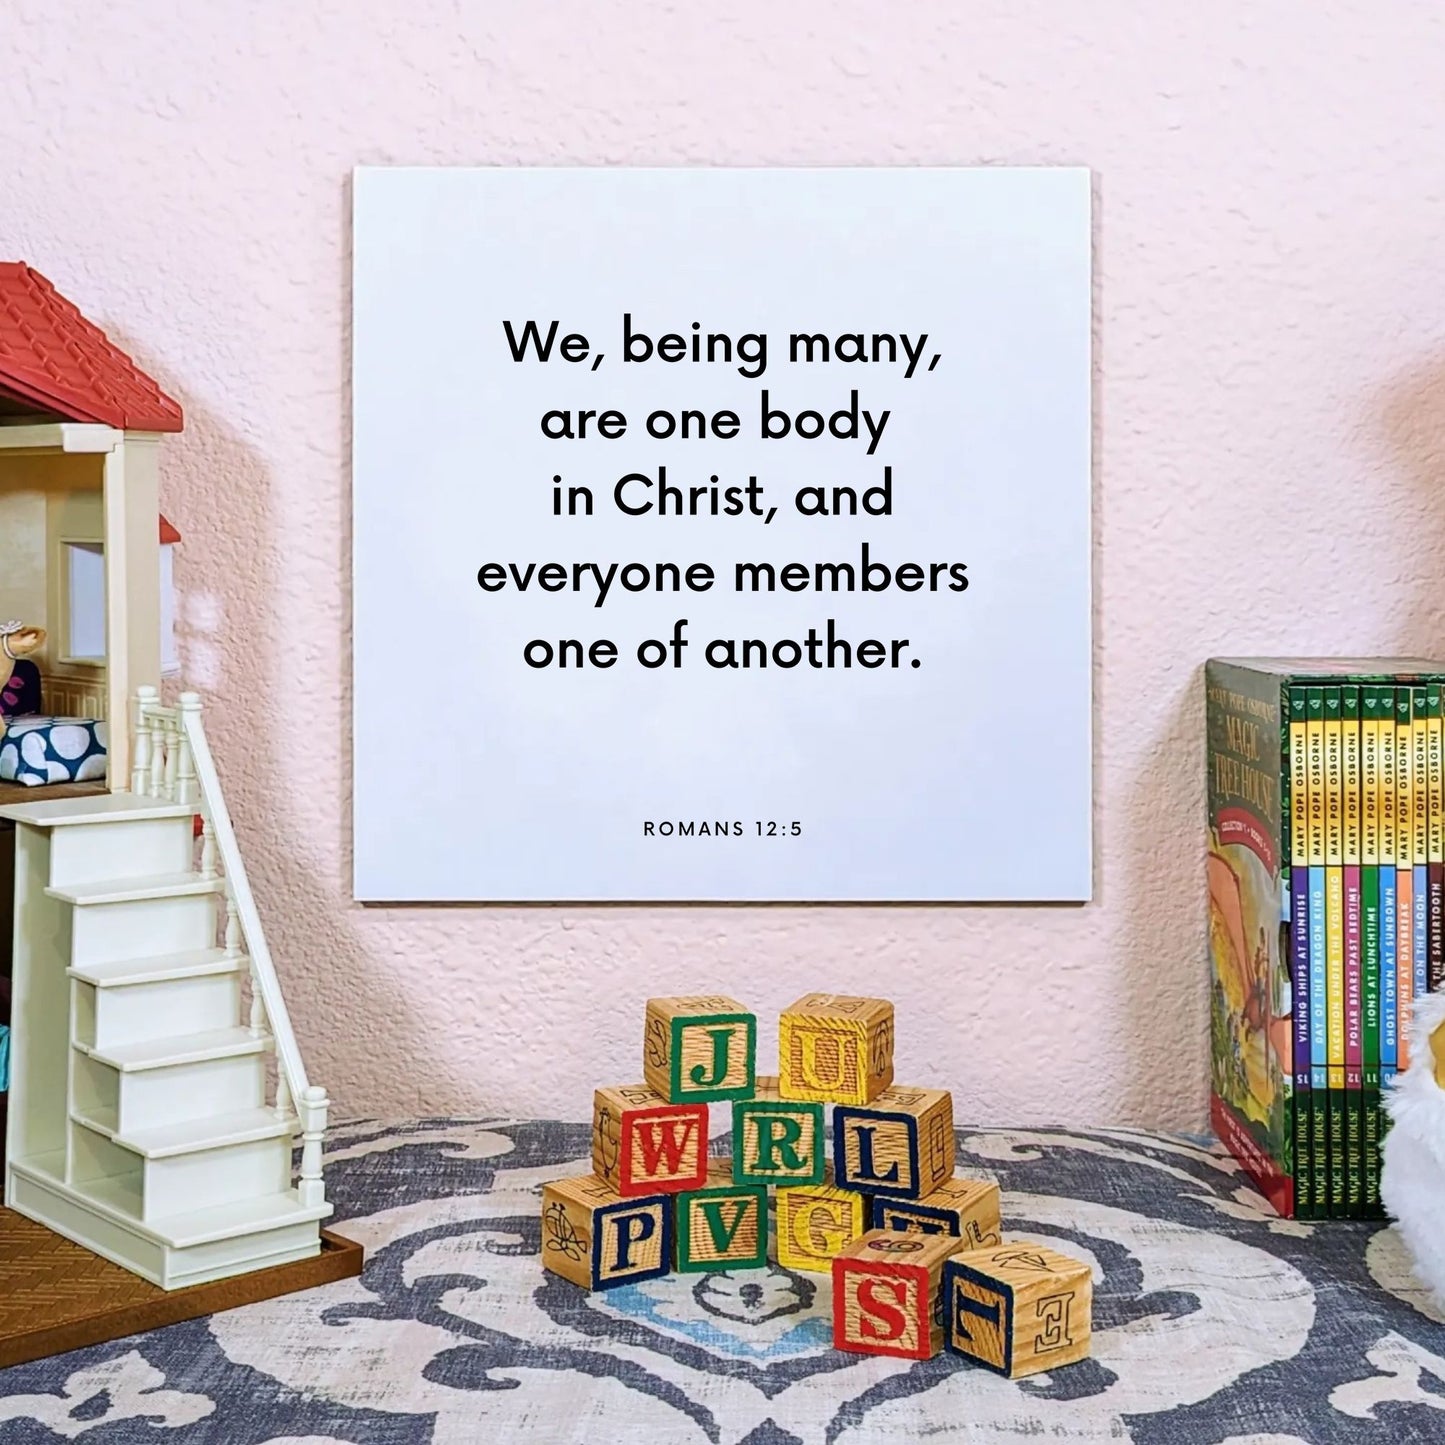 Playroom mouting of the scripture tile for Romans 12:5 - "We, being many, are one body in Christ"